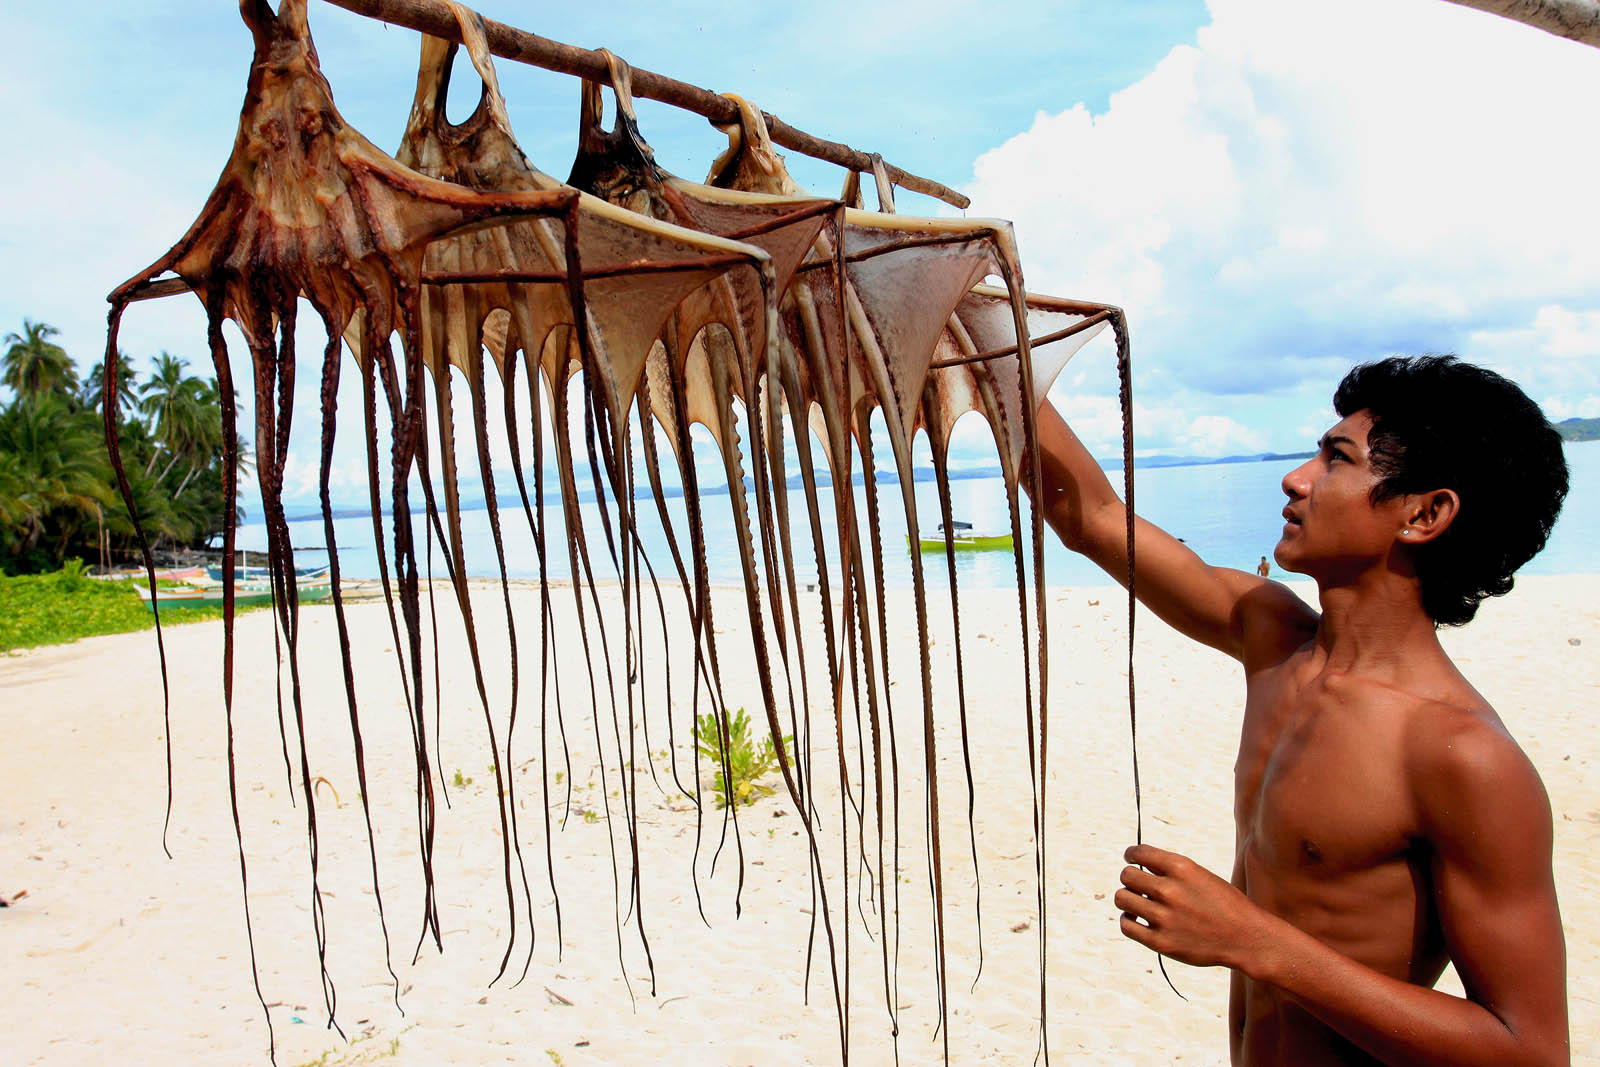 BOUNTY FROM THE SEA. A fisherman checks the octopus he has dried on the beach in General Luna town in Siargao Island on Saturday, June 1. MindaNews photo by ROEL CATOTO